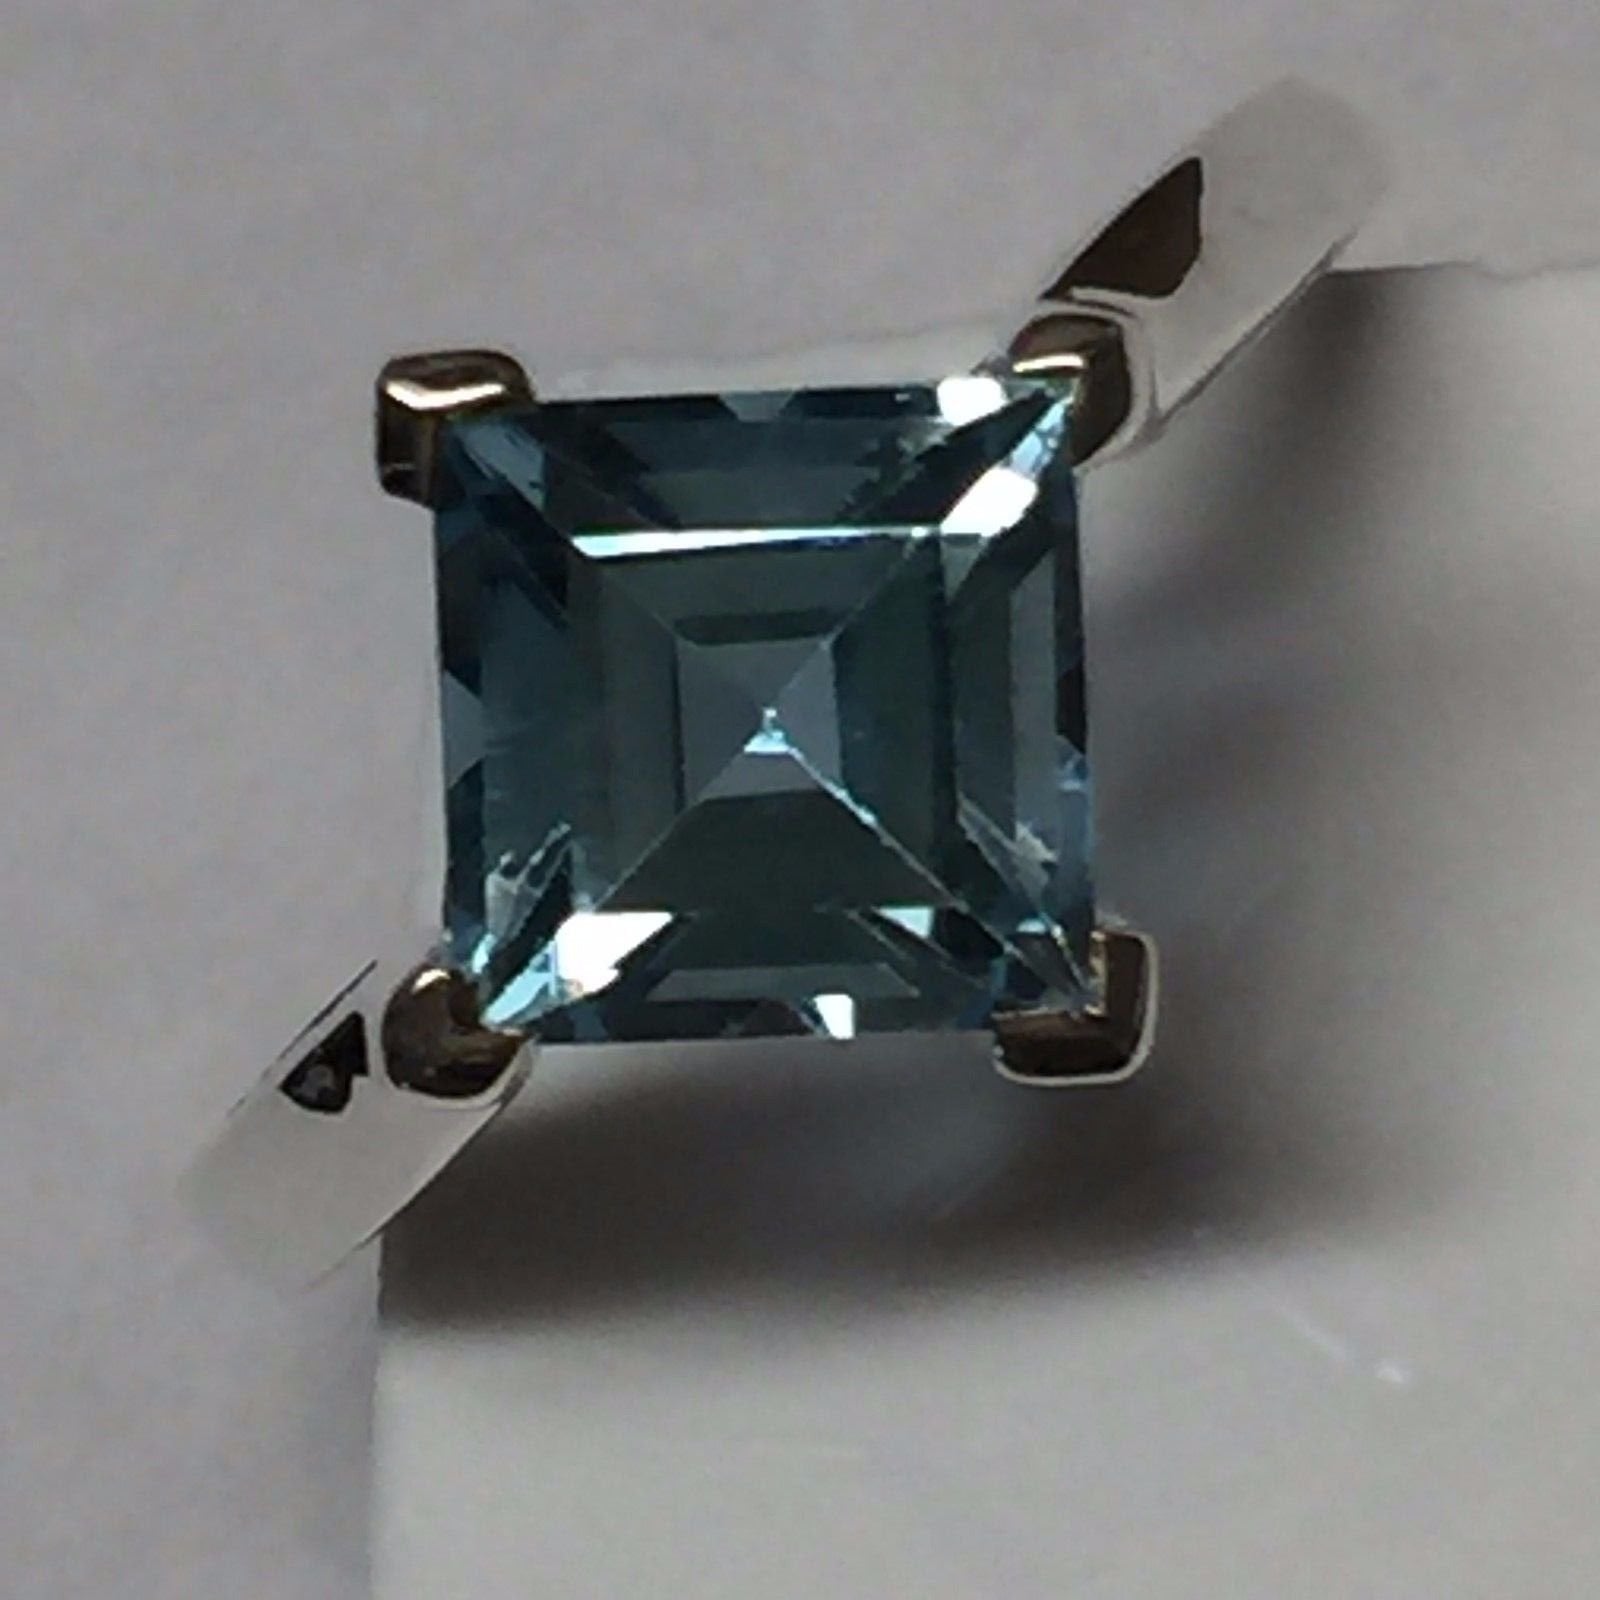 Natural 1.25ct Blue Topaz 925 Solid Sterling Silver Engagement Ring Size 5, 6, 7, 8, 9 - Natural Rocks by Kala